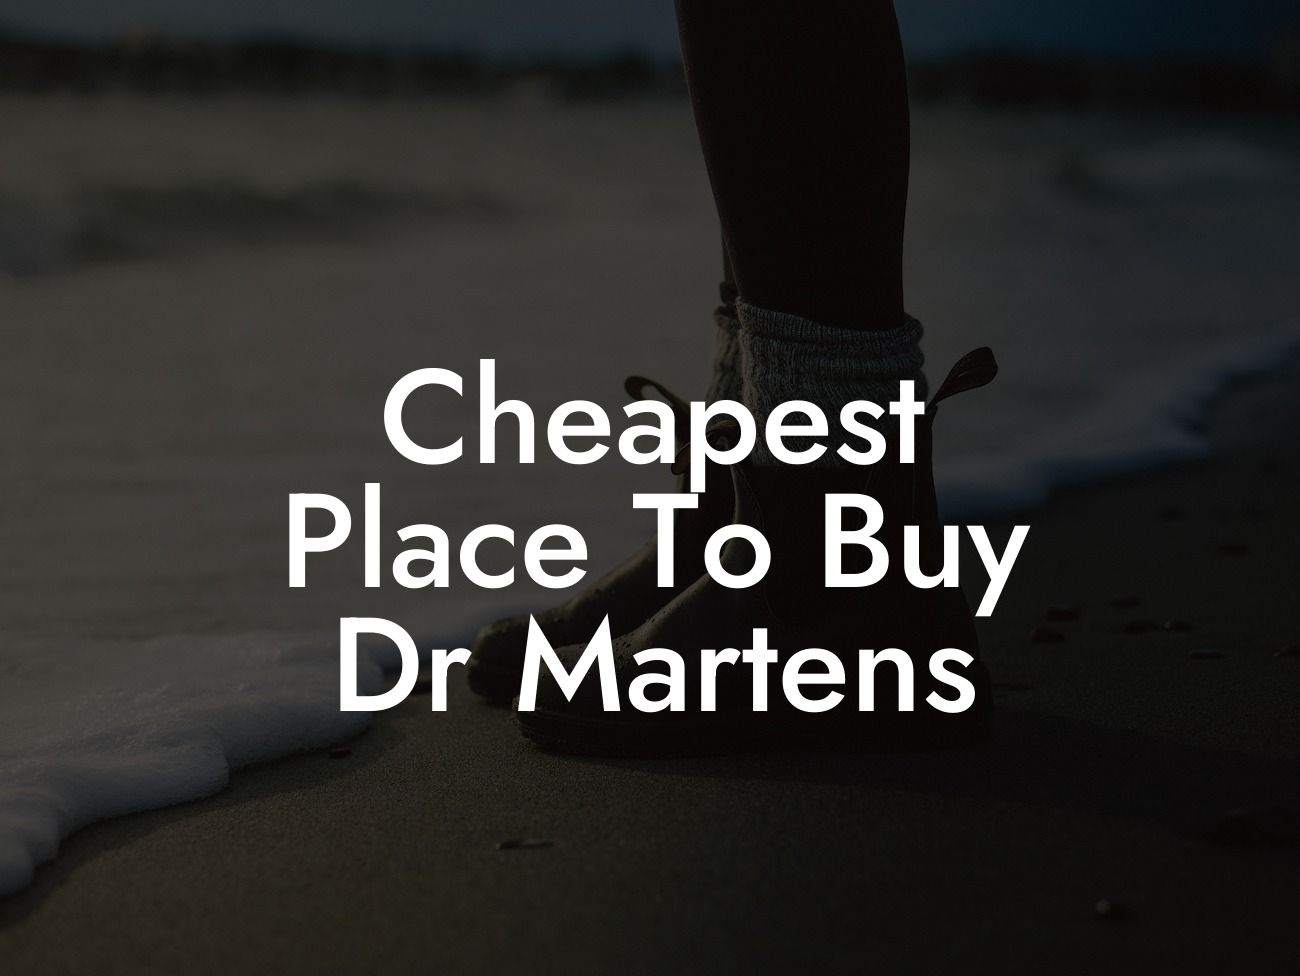 Cheapest Place To Buy Dr Martens